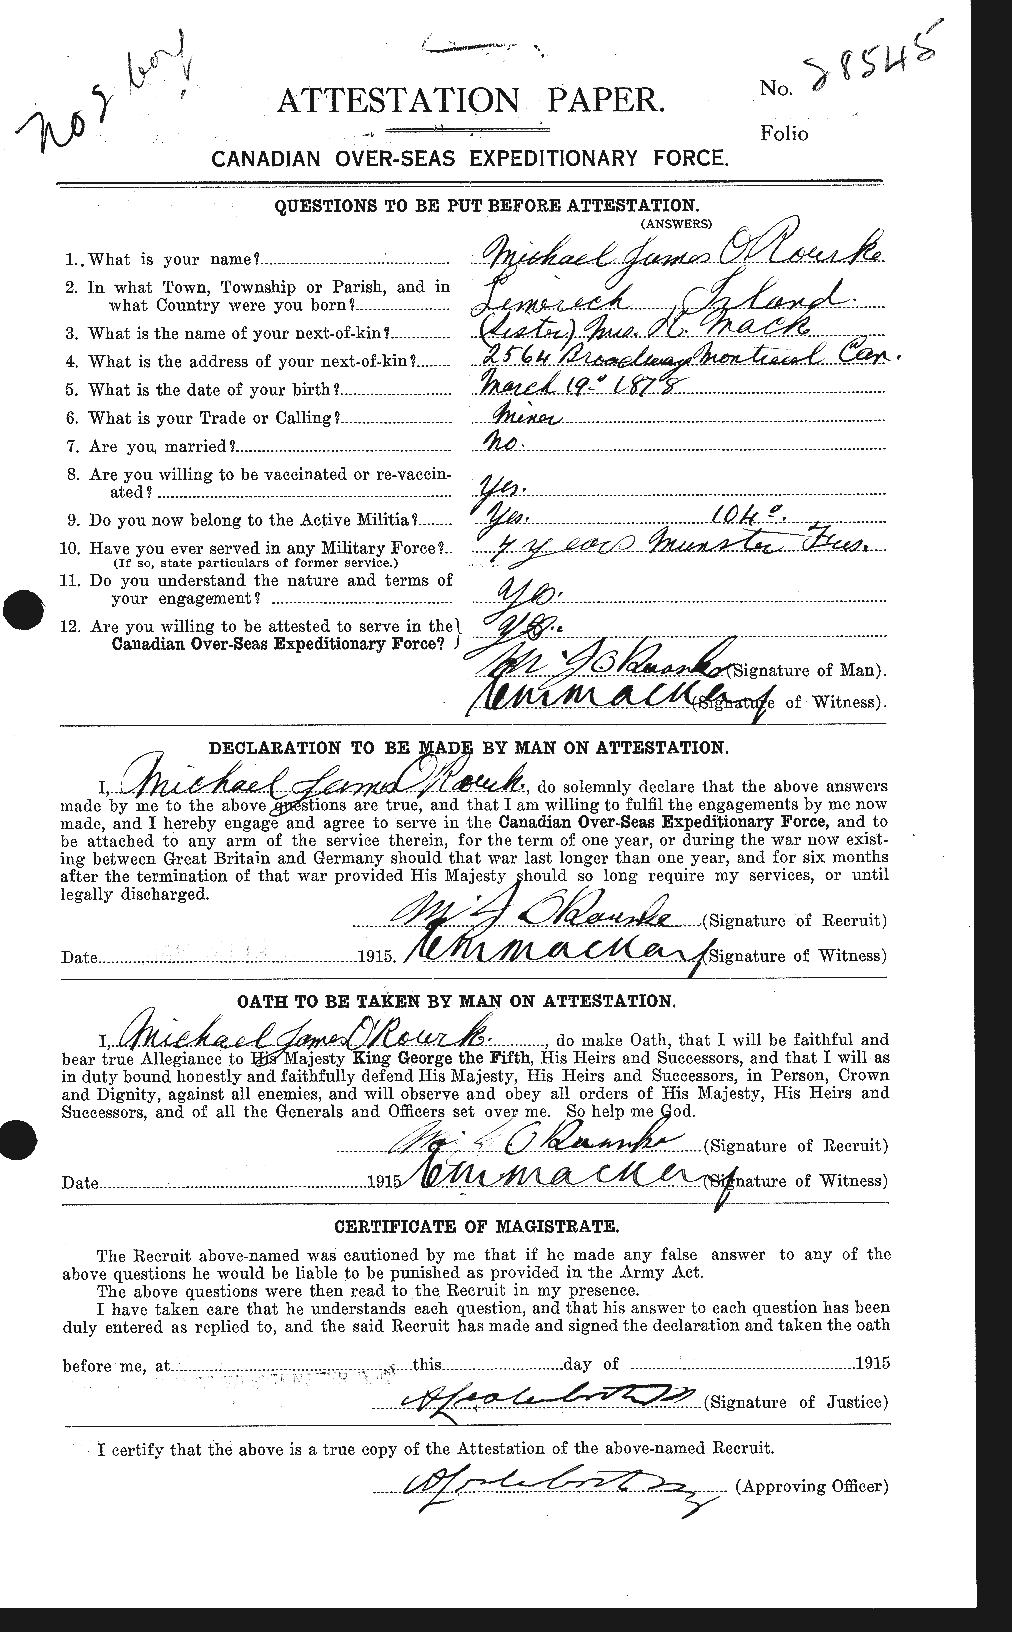 Personnel Records of the First World War - CEF 559802a